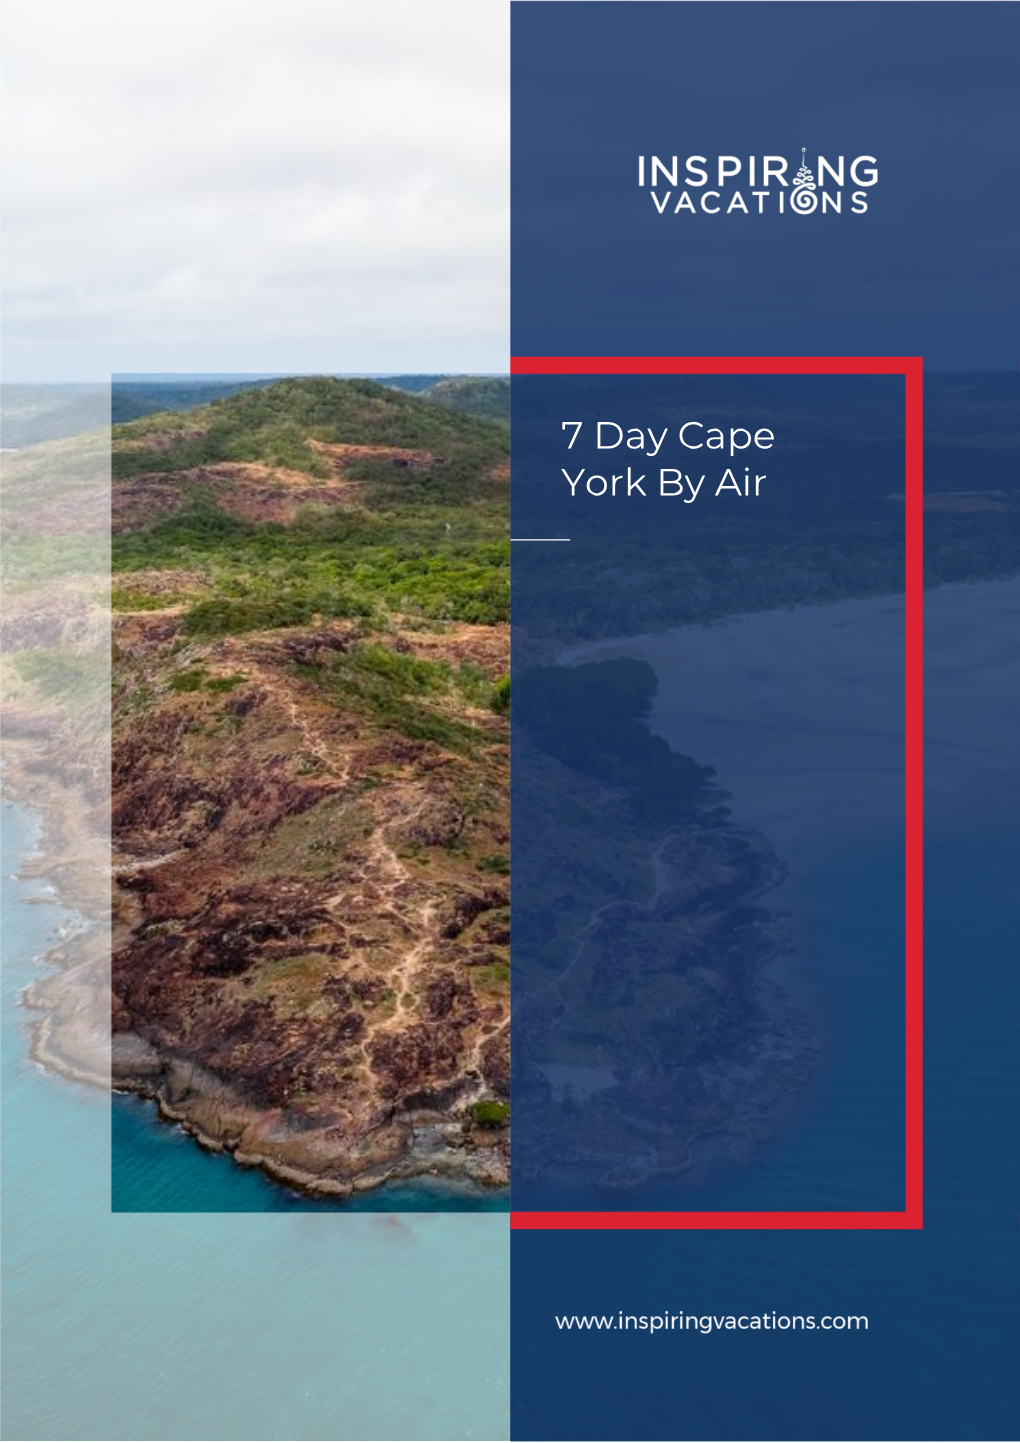 7 Day Cape York by Air from $2,899 PER PERSON, TWIN SHARE